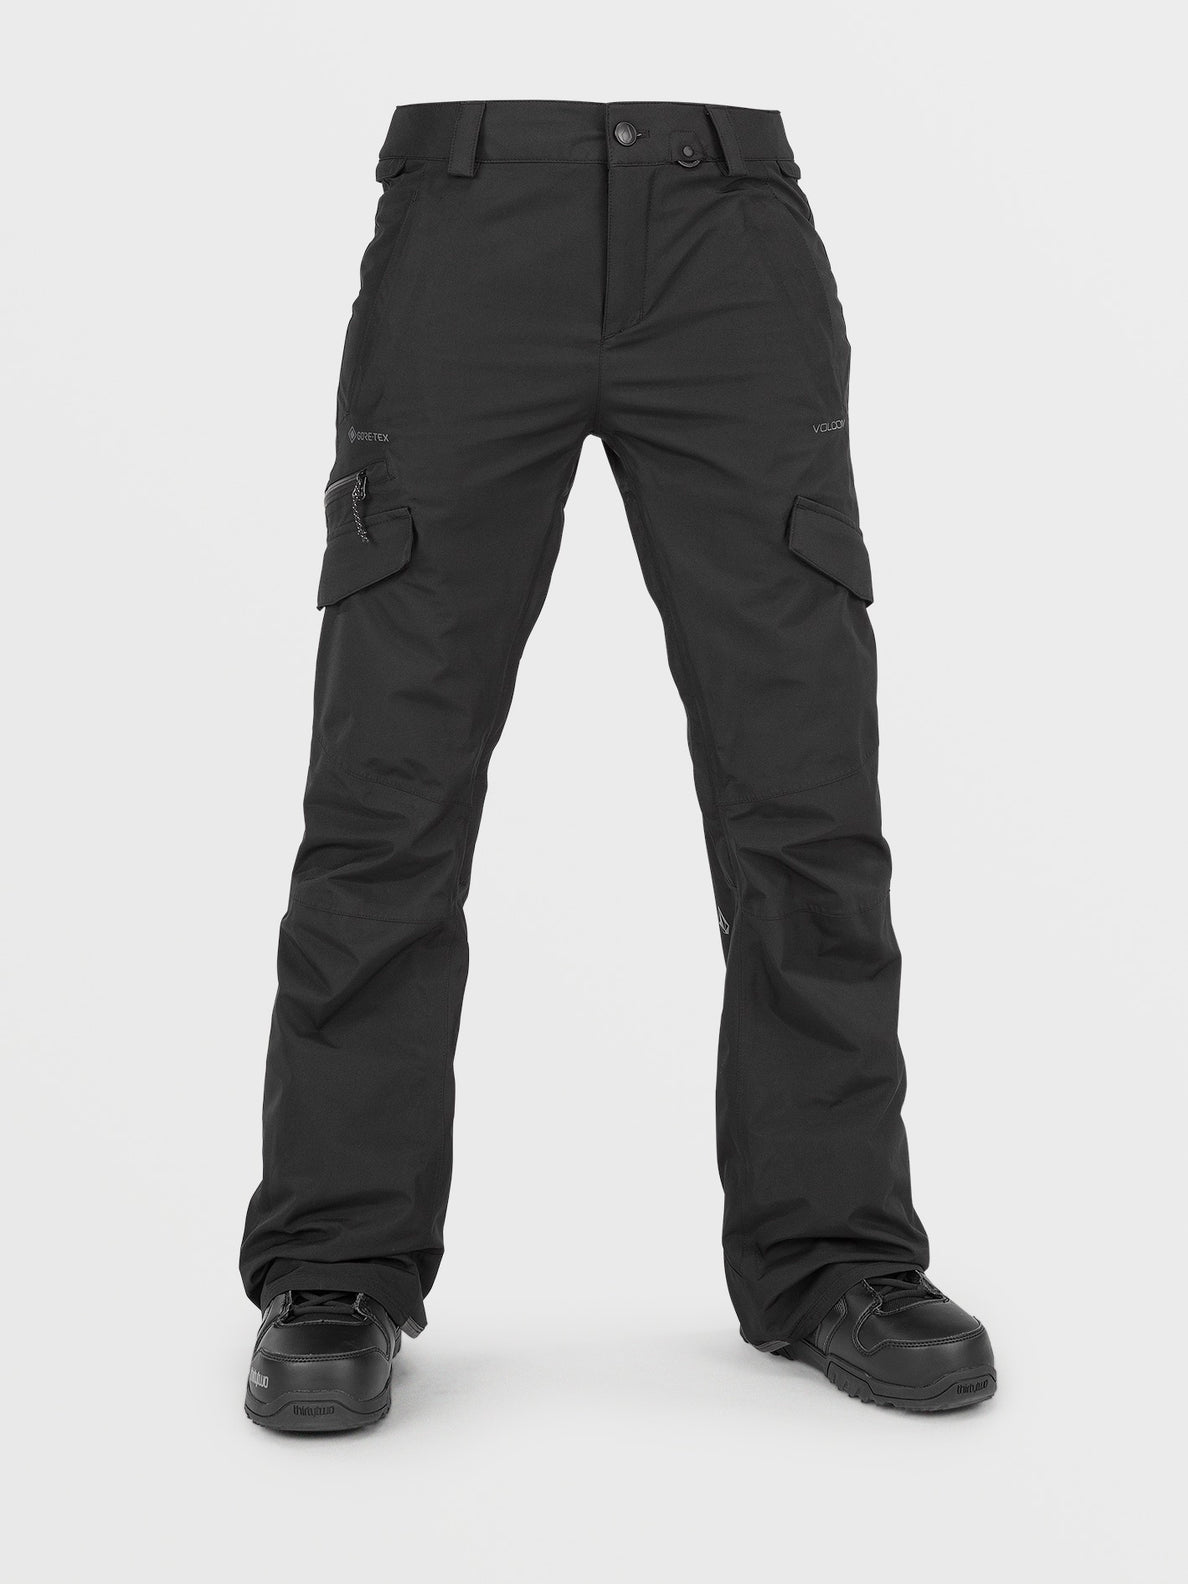 Womens Under Armour storm proof pants XL in 2023